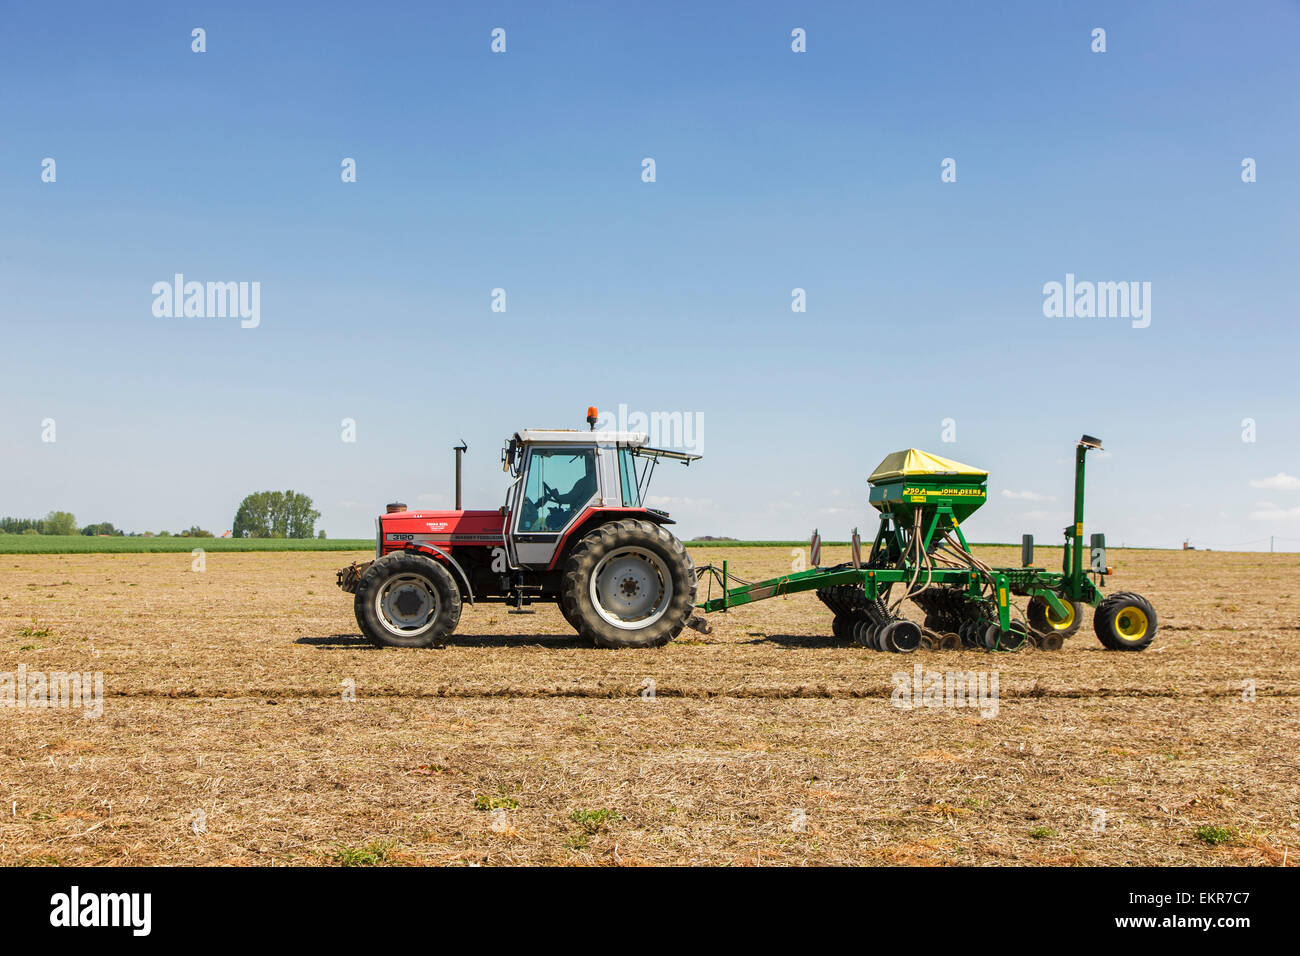 Tractor pulling John Deere 750A no-till seed drill working on farmland Stock Photo